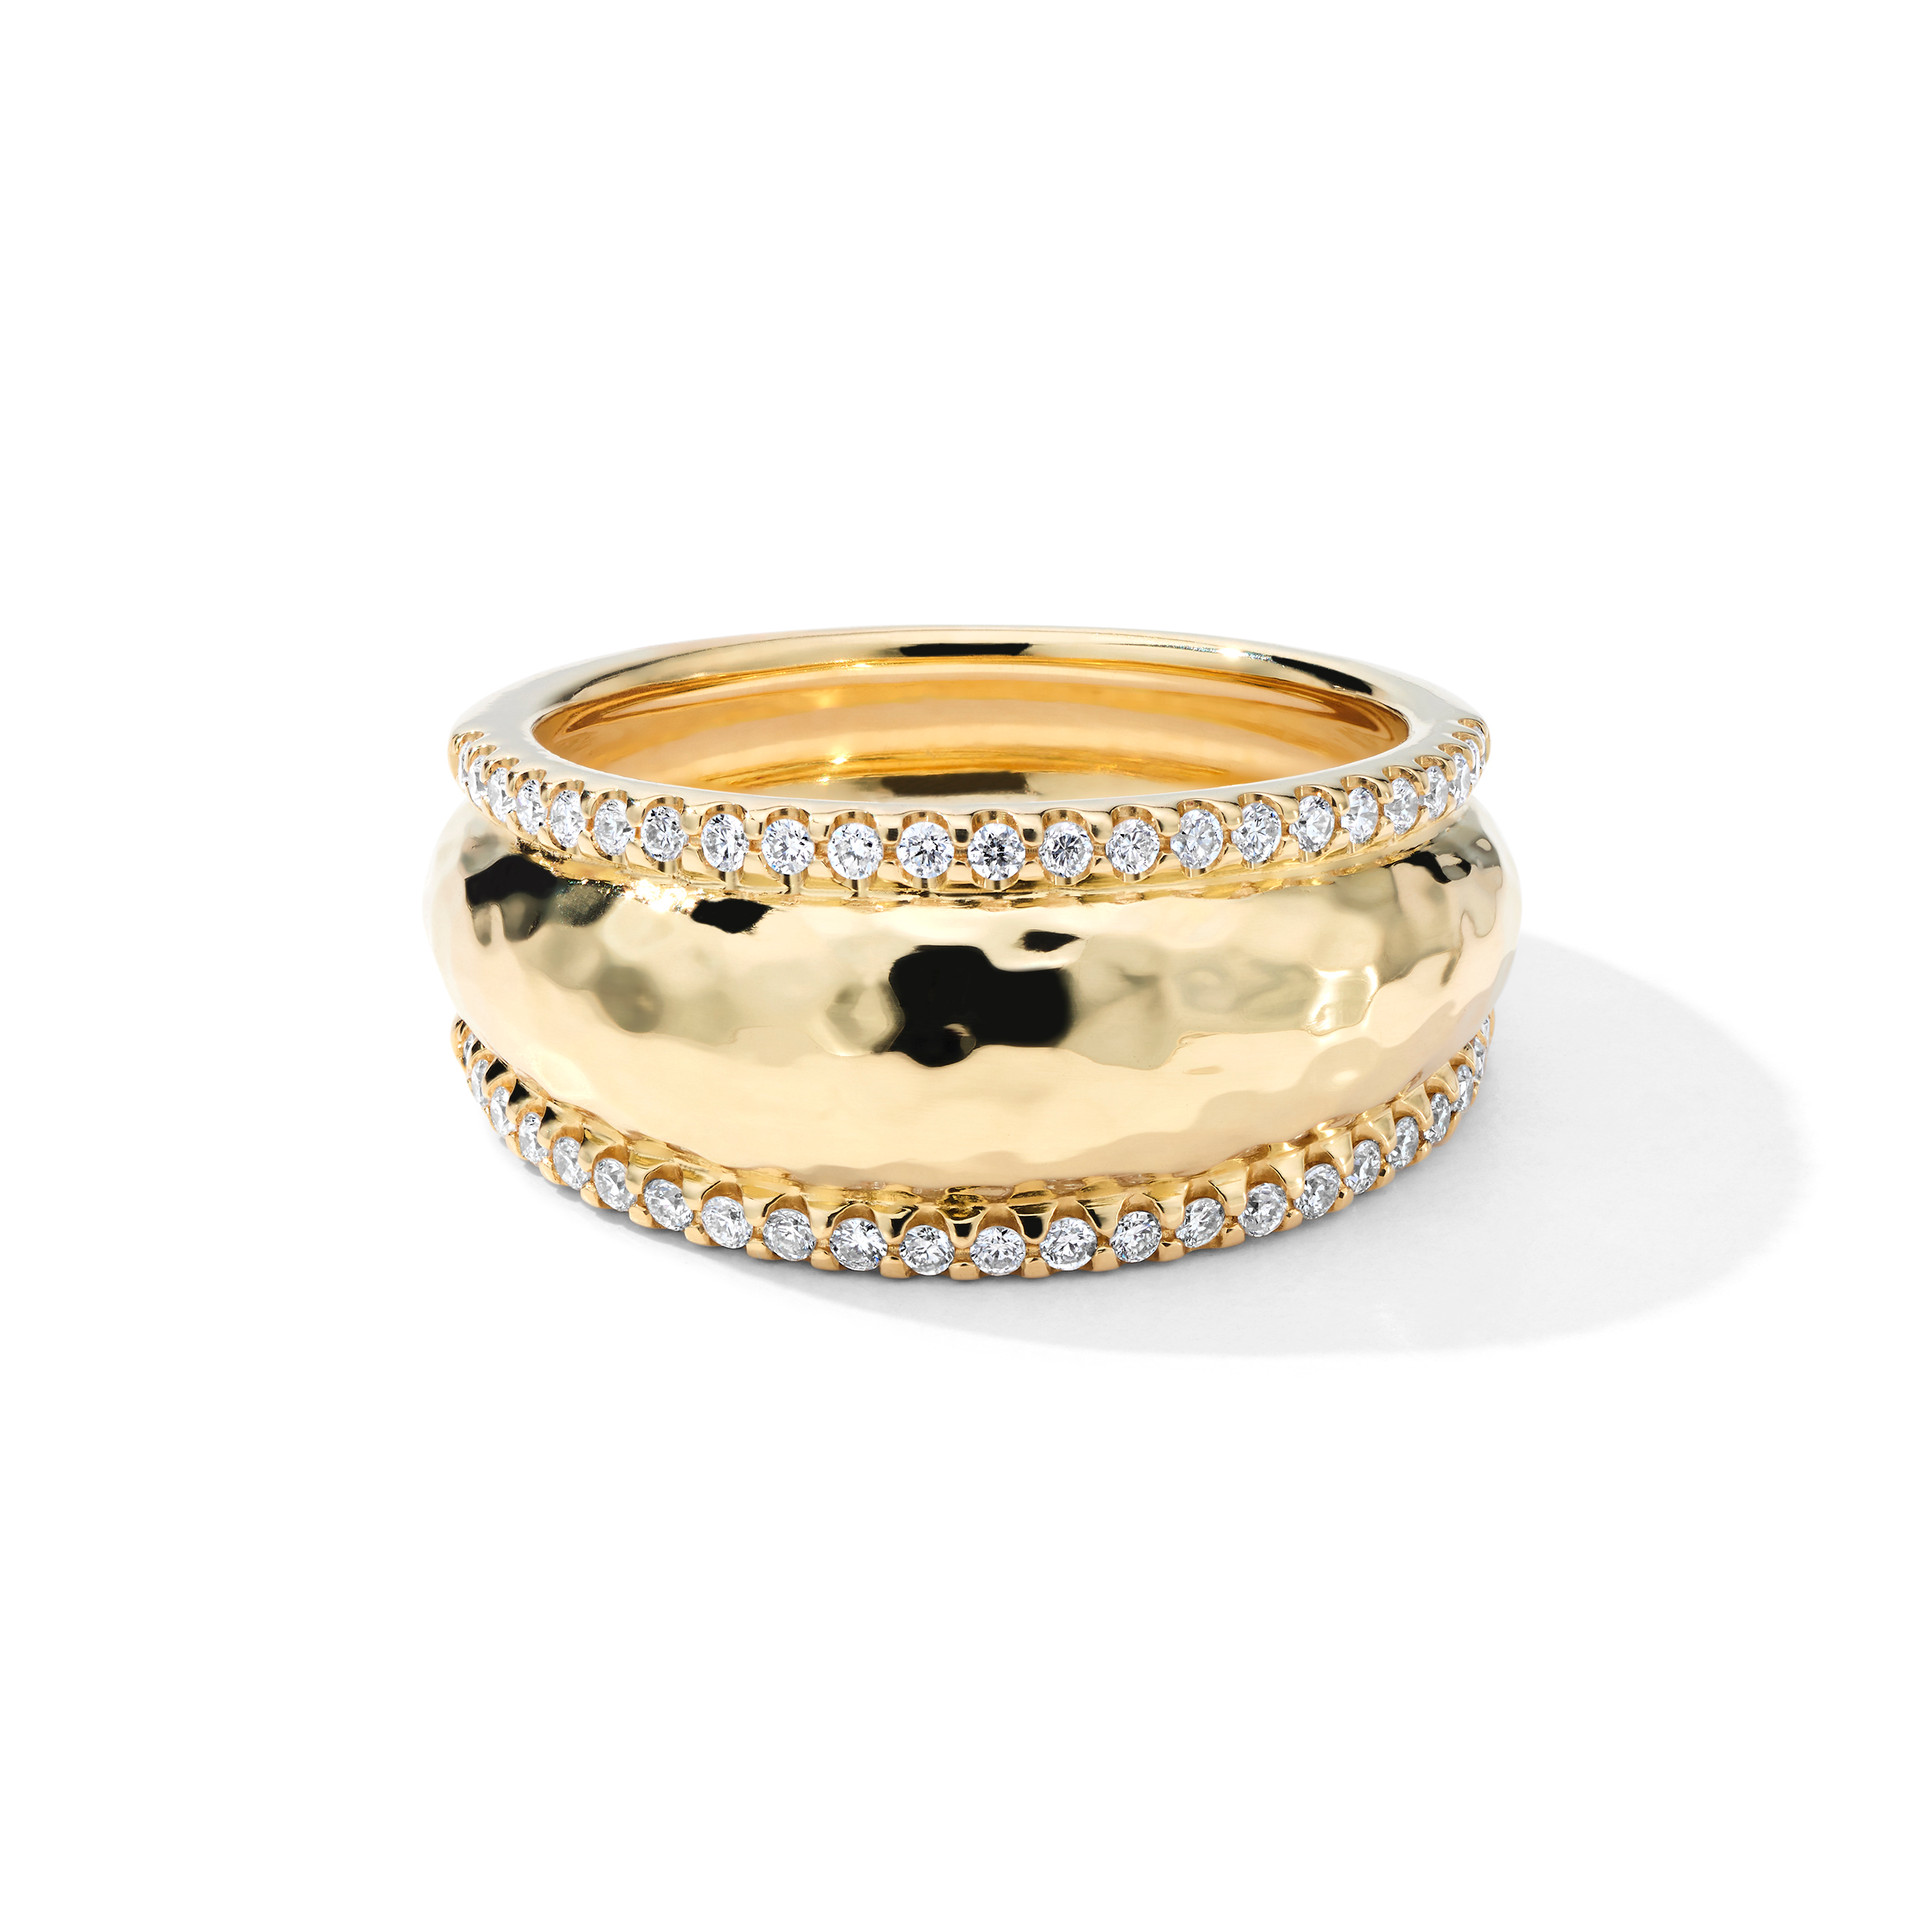 Goddess Thin Hammered Dome Ring in 18K Gold with Diamonds